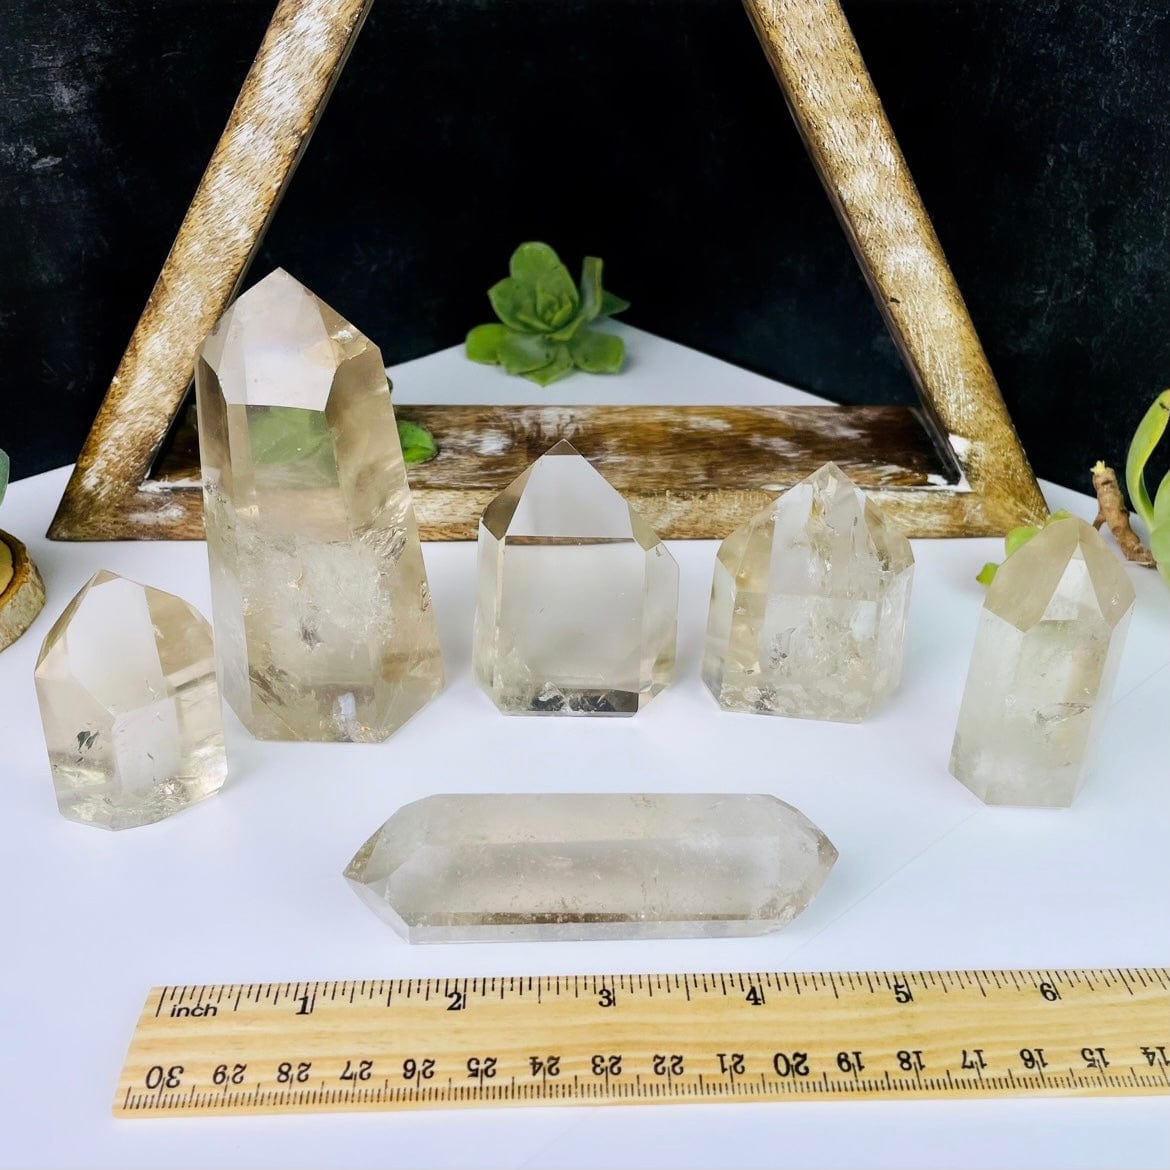 Smoky Quartz Points with Inclusions - You Choose. All displayed next to a ruler for size reference.